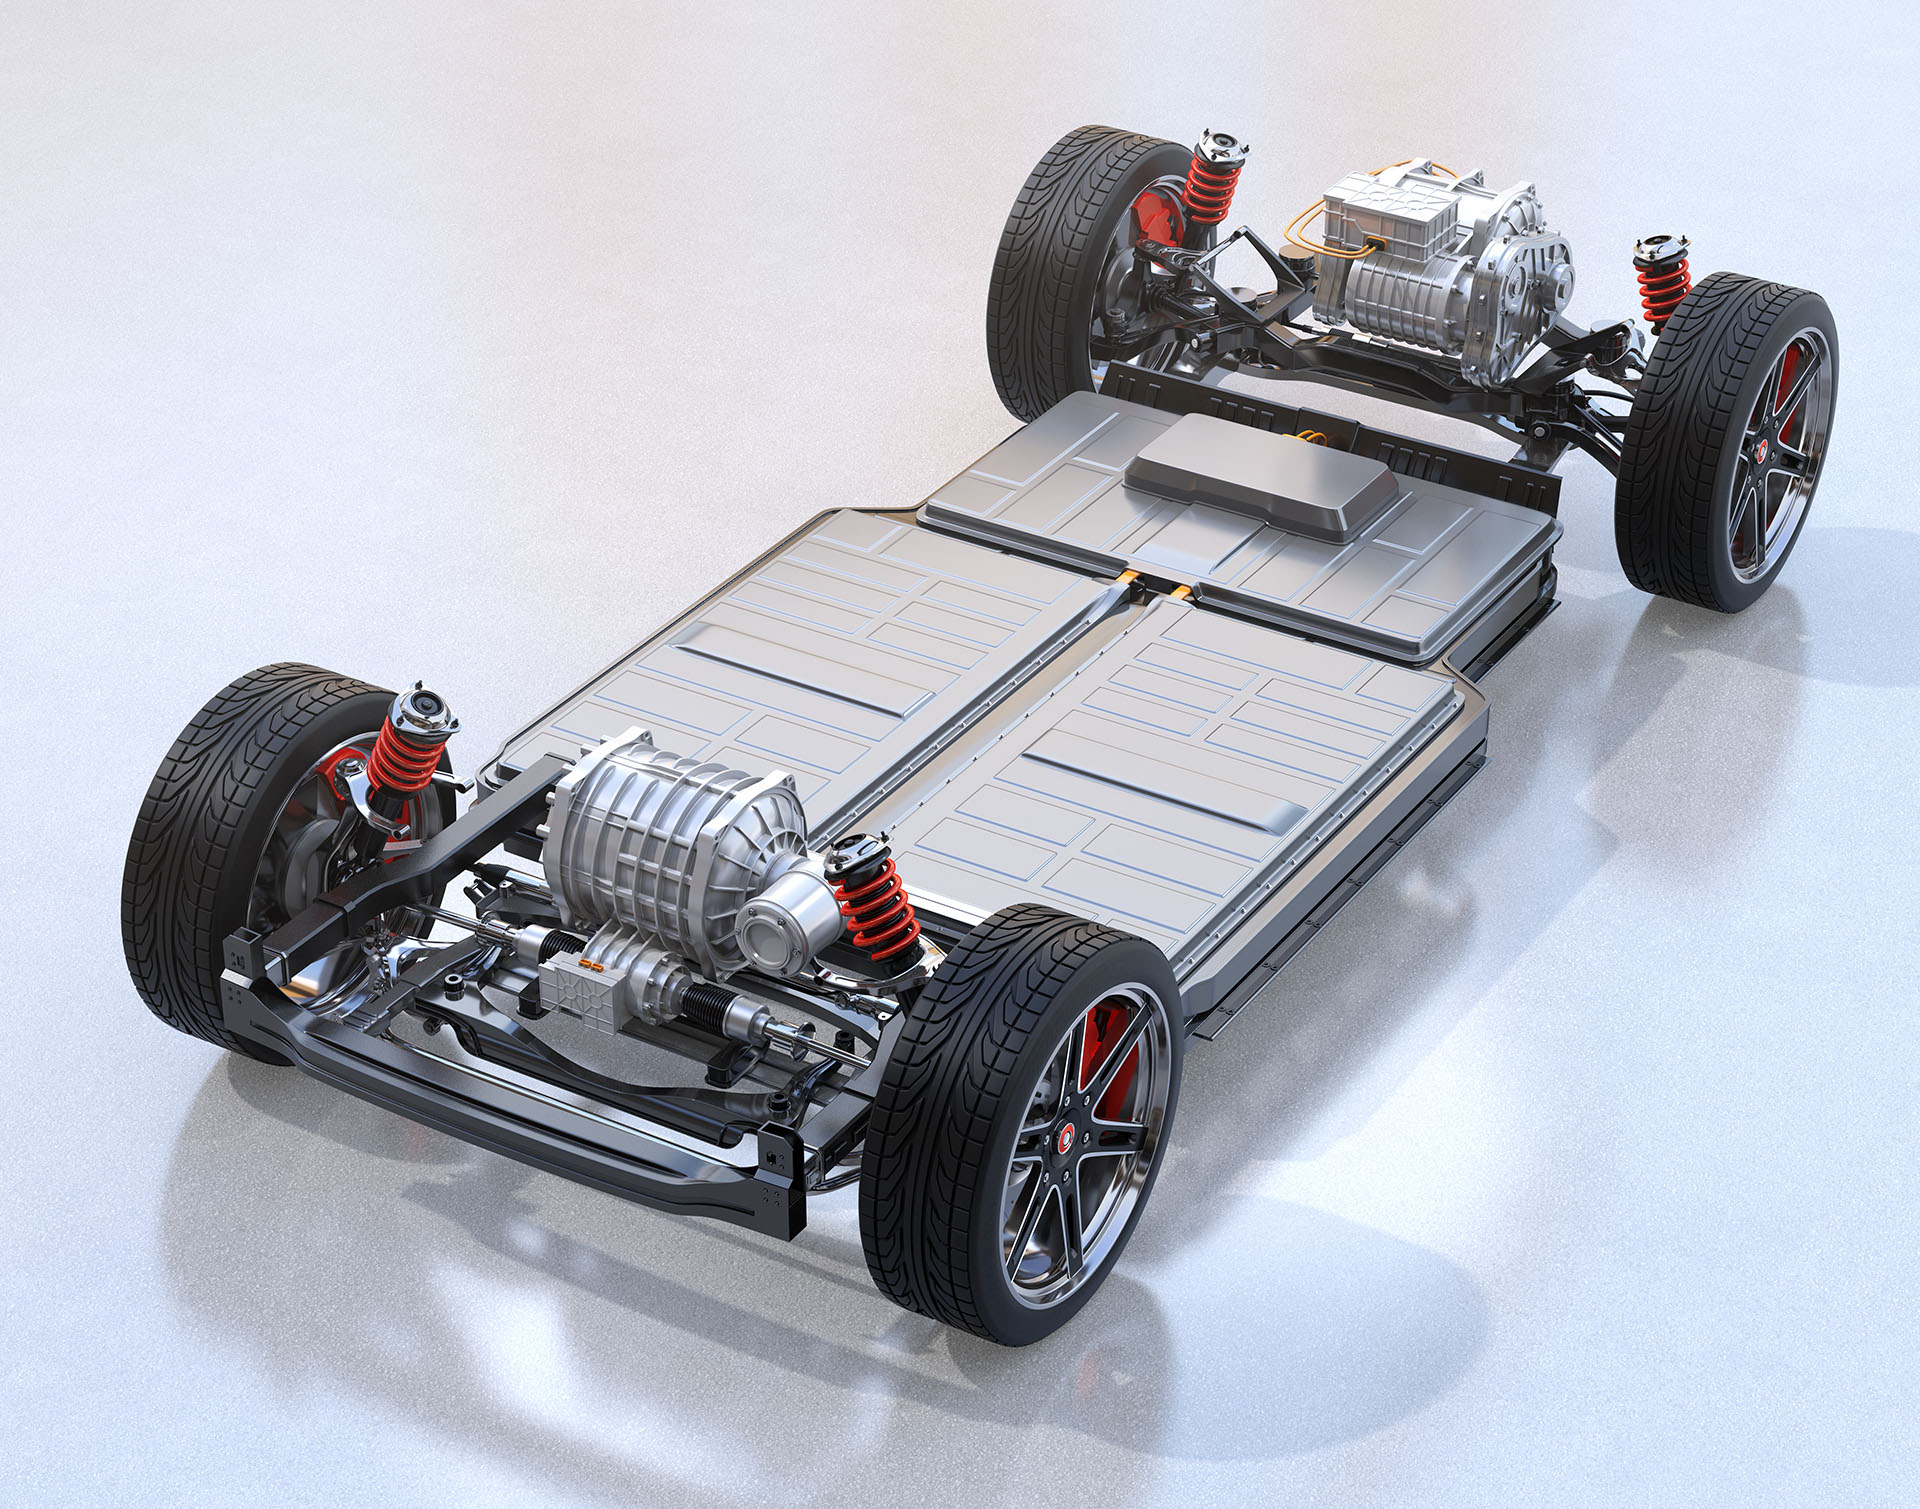 Chassis with engine, tires and battery pack of an electric car